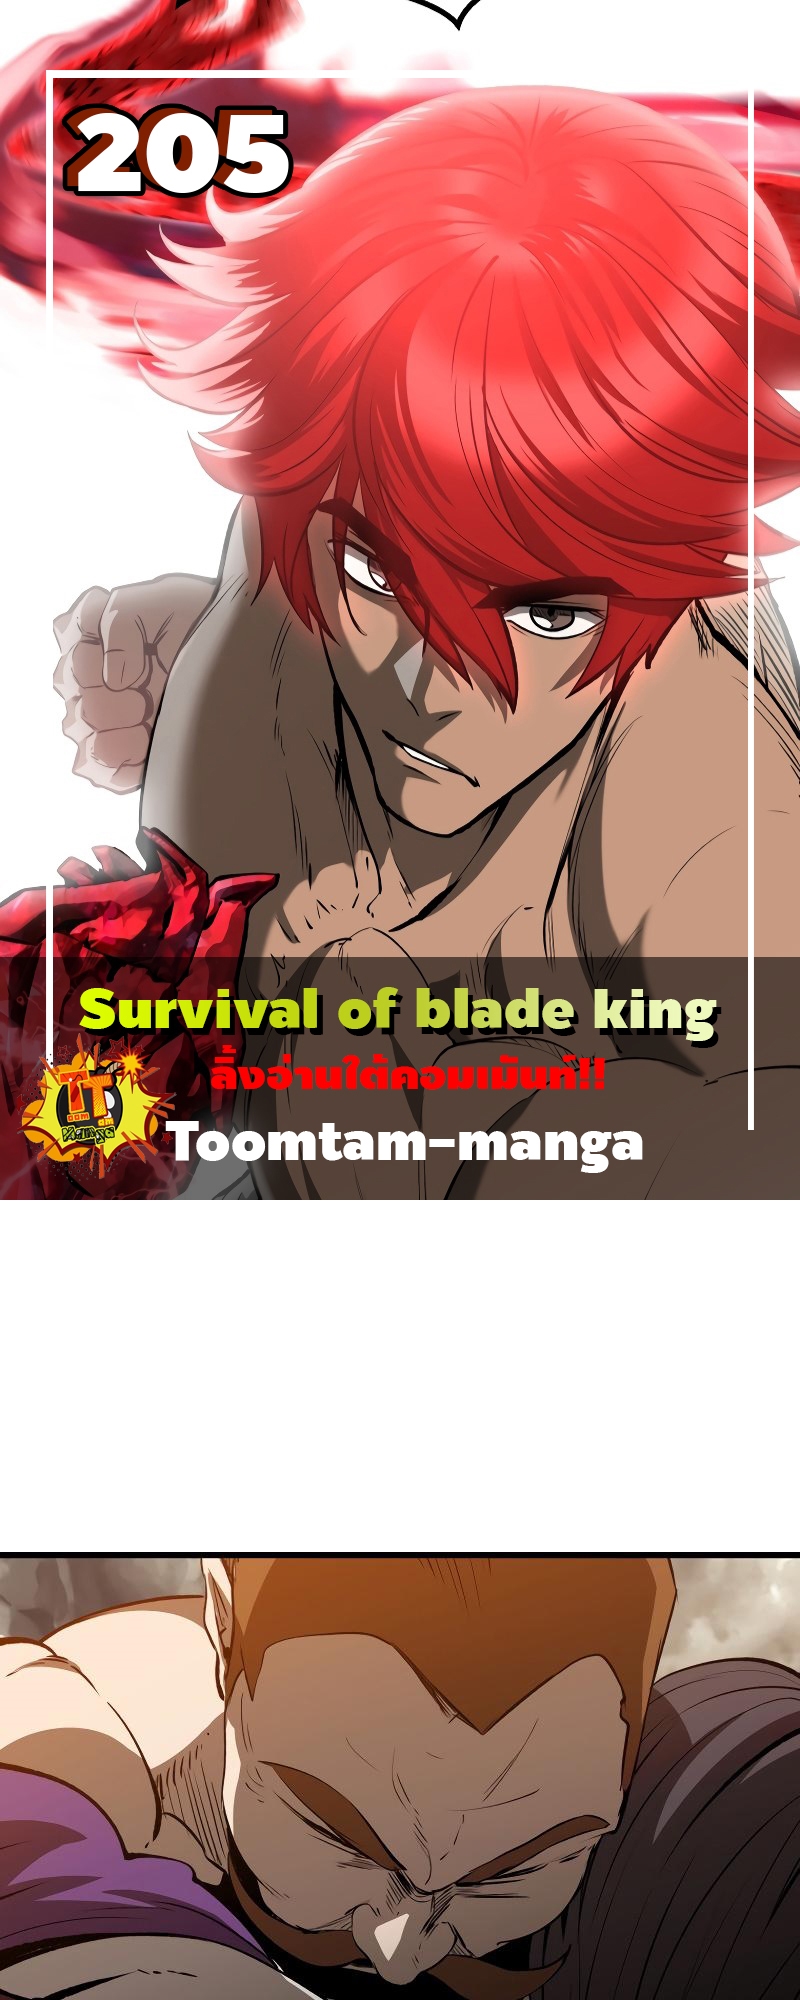 Survival of blade king 205 14 05 25670001